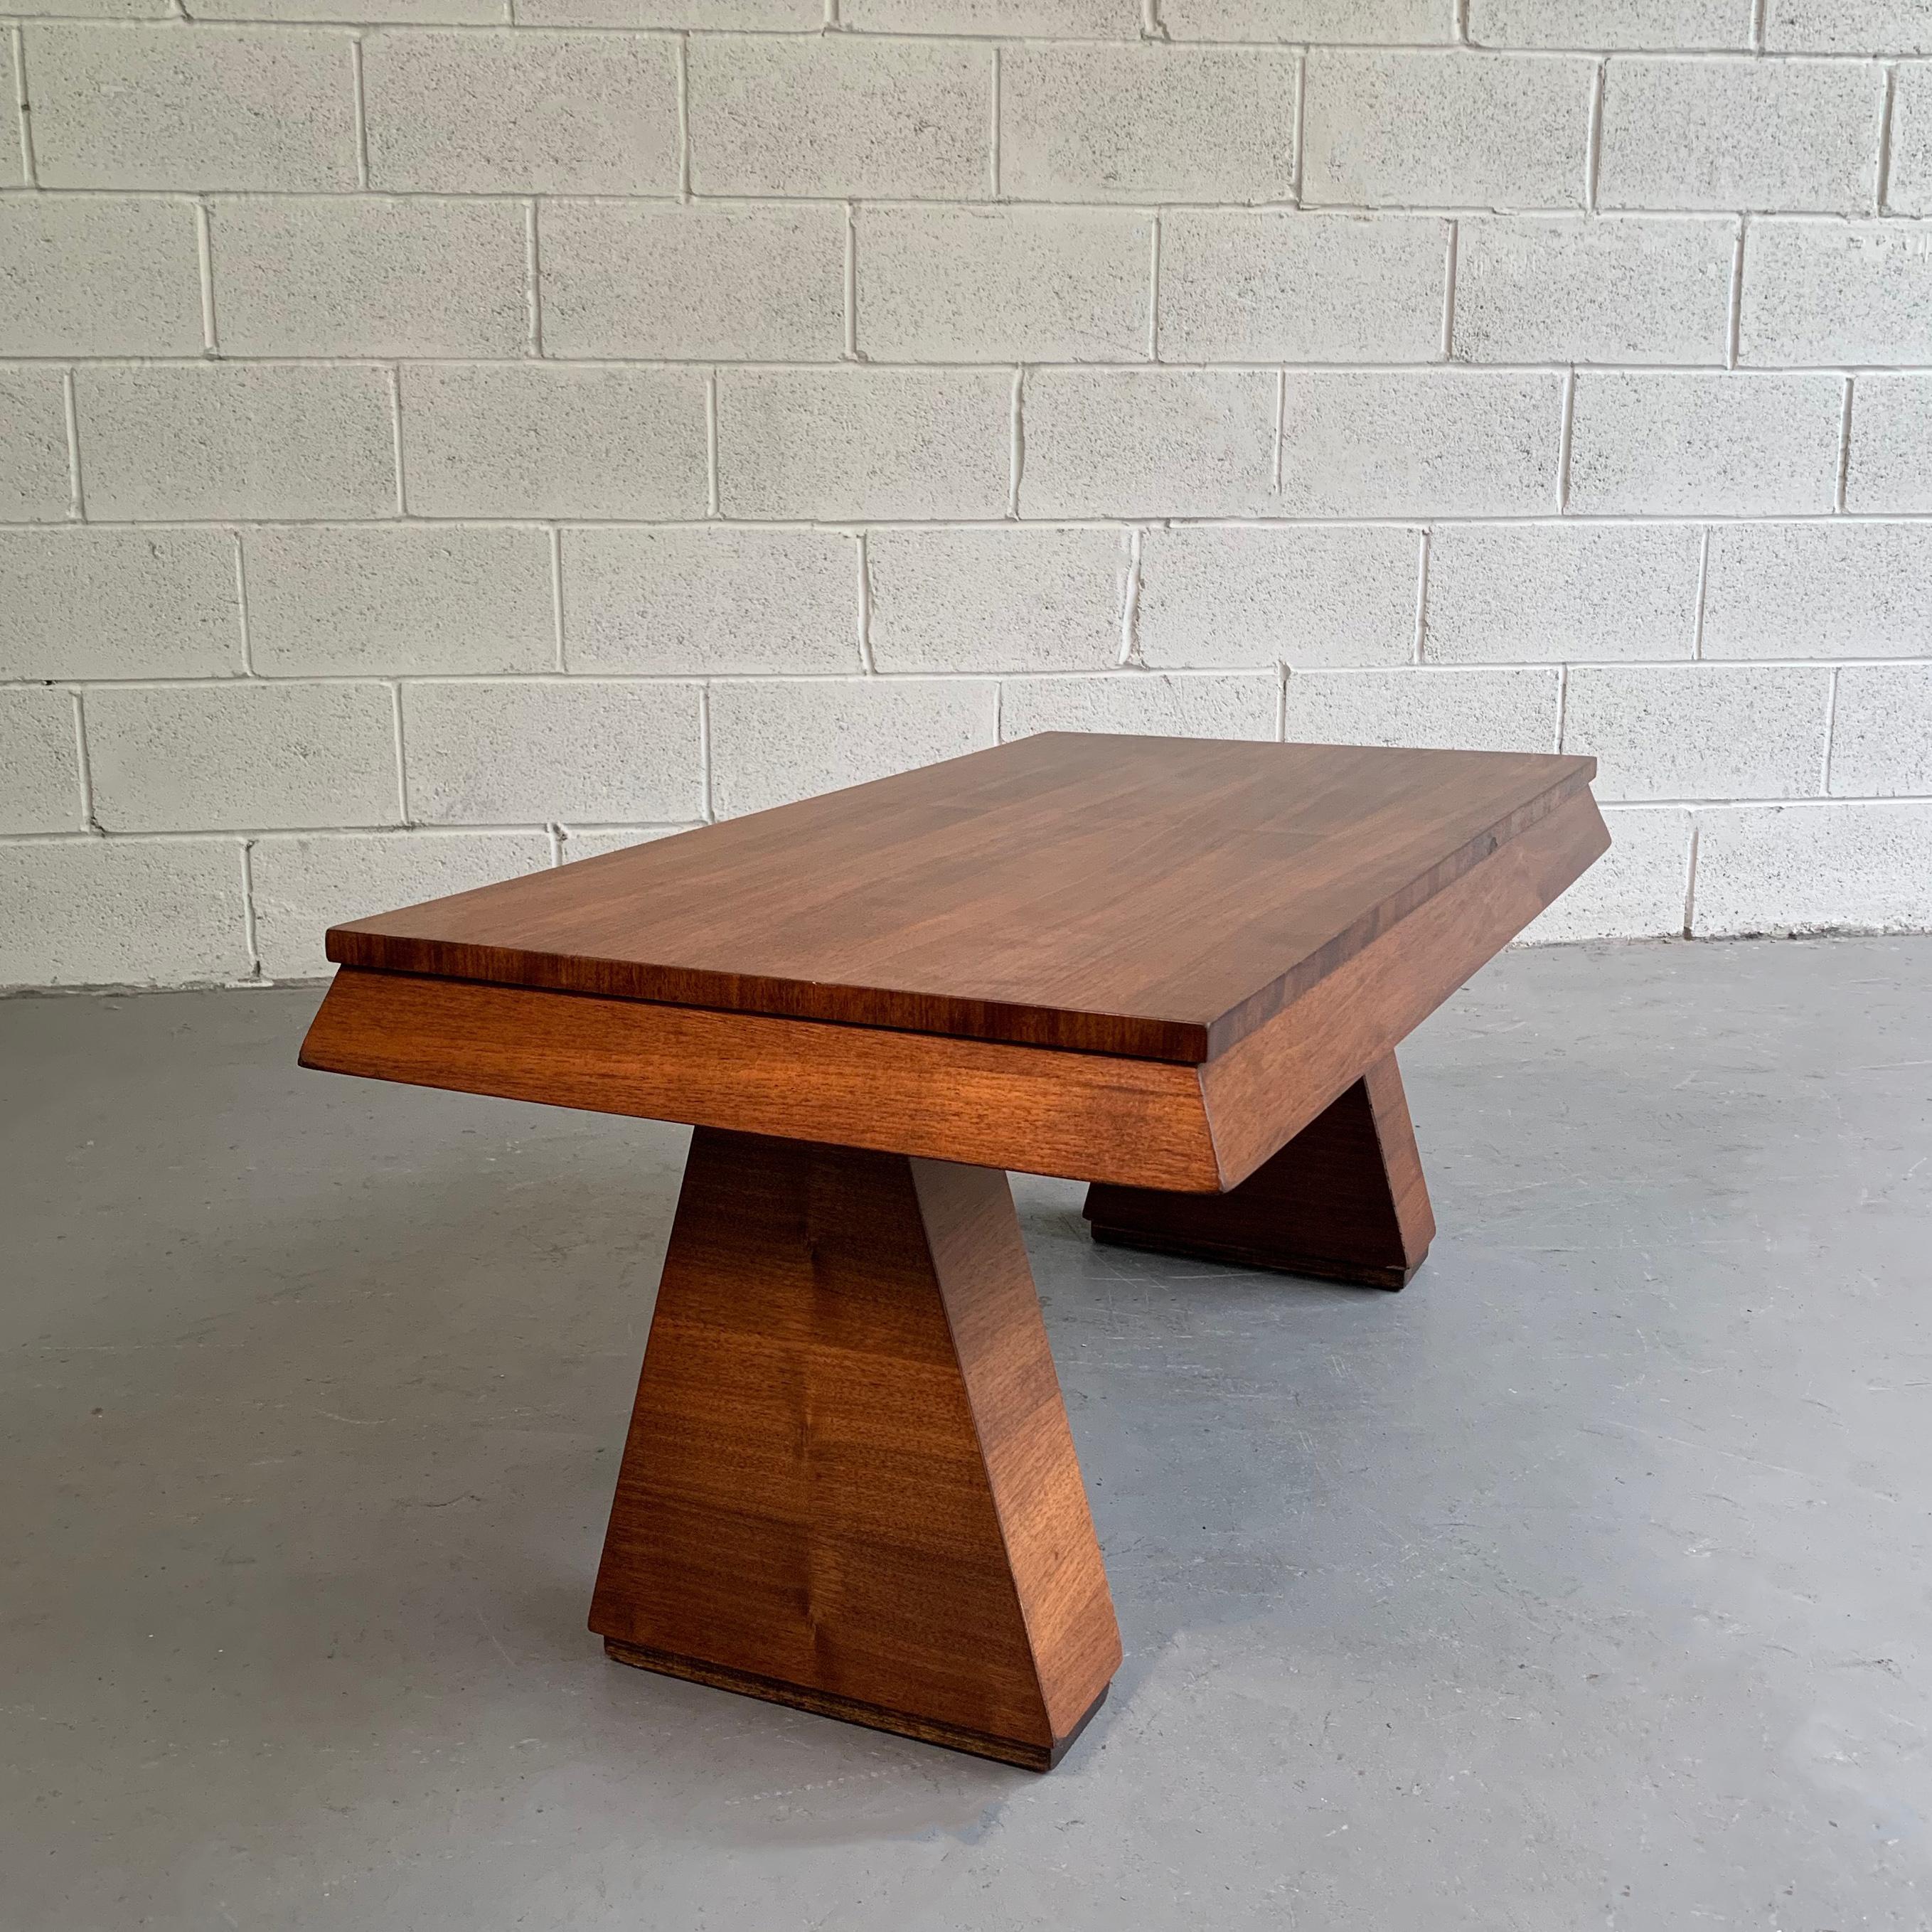 Art Deco Walnut Coffee Table Attributed to Donald Deskey In Good Condition For Sale In Brooklyn, NY